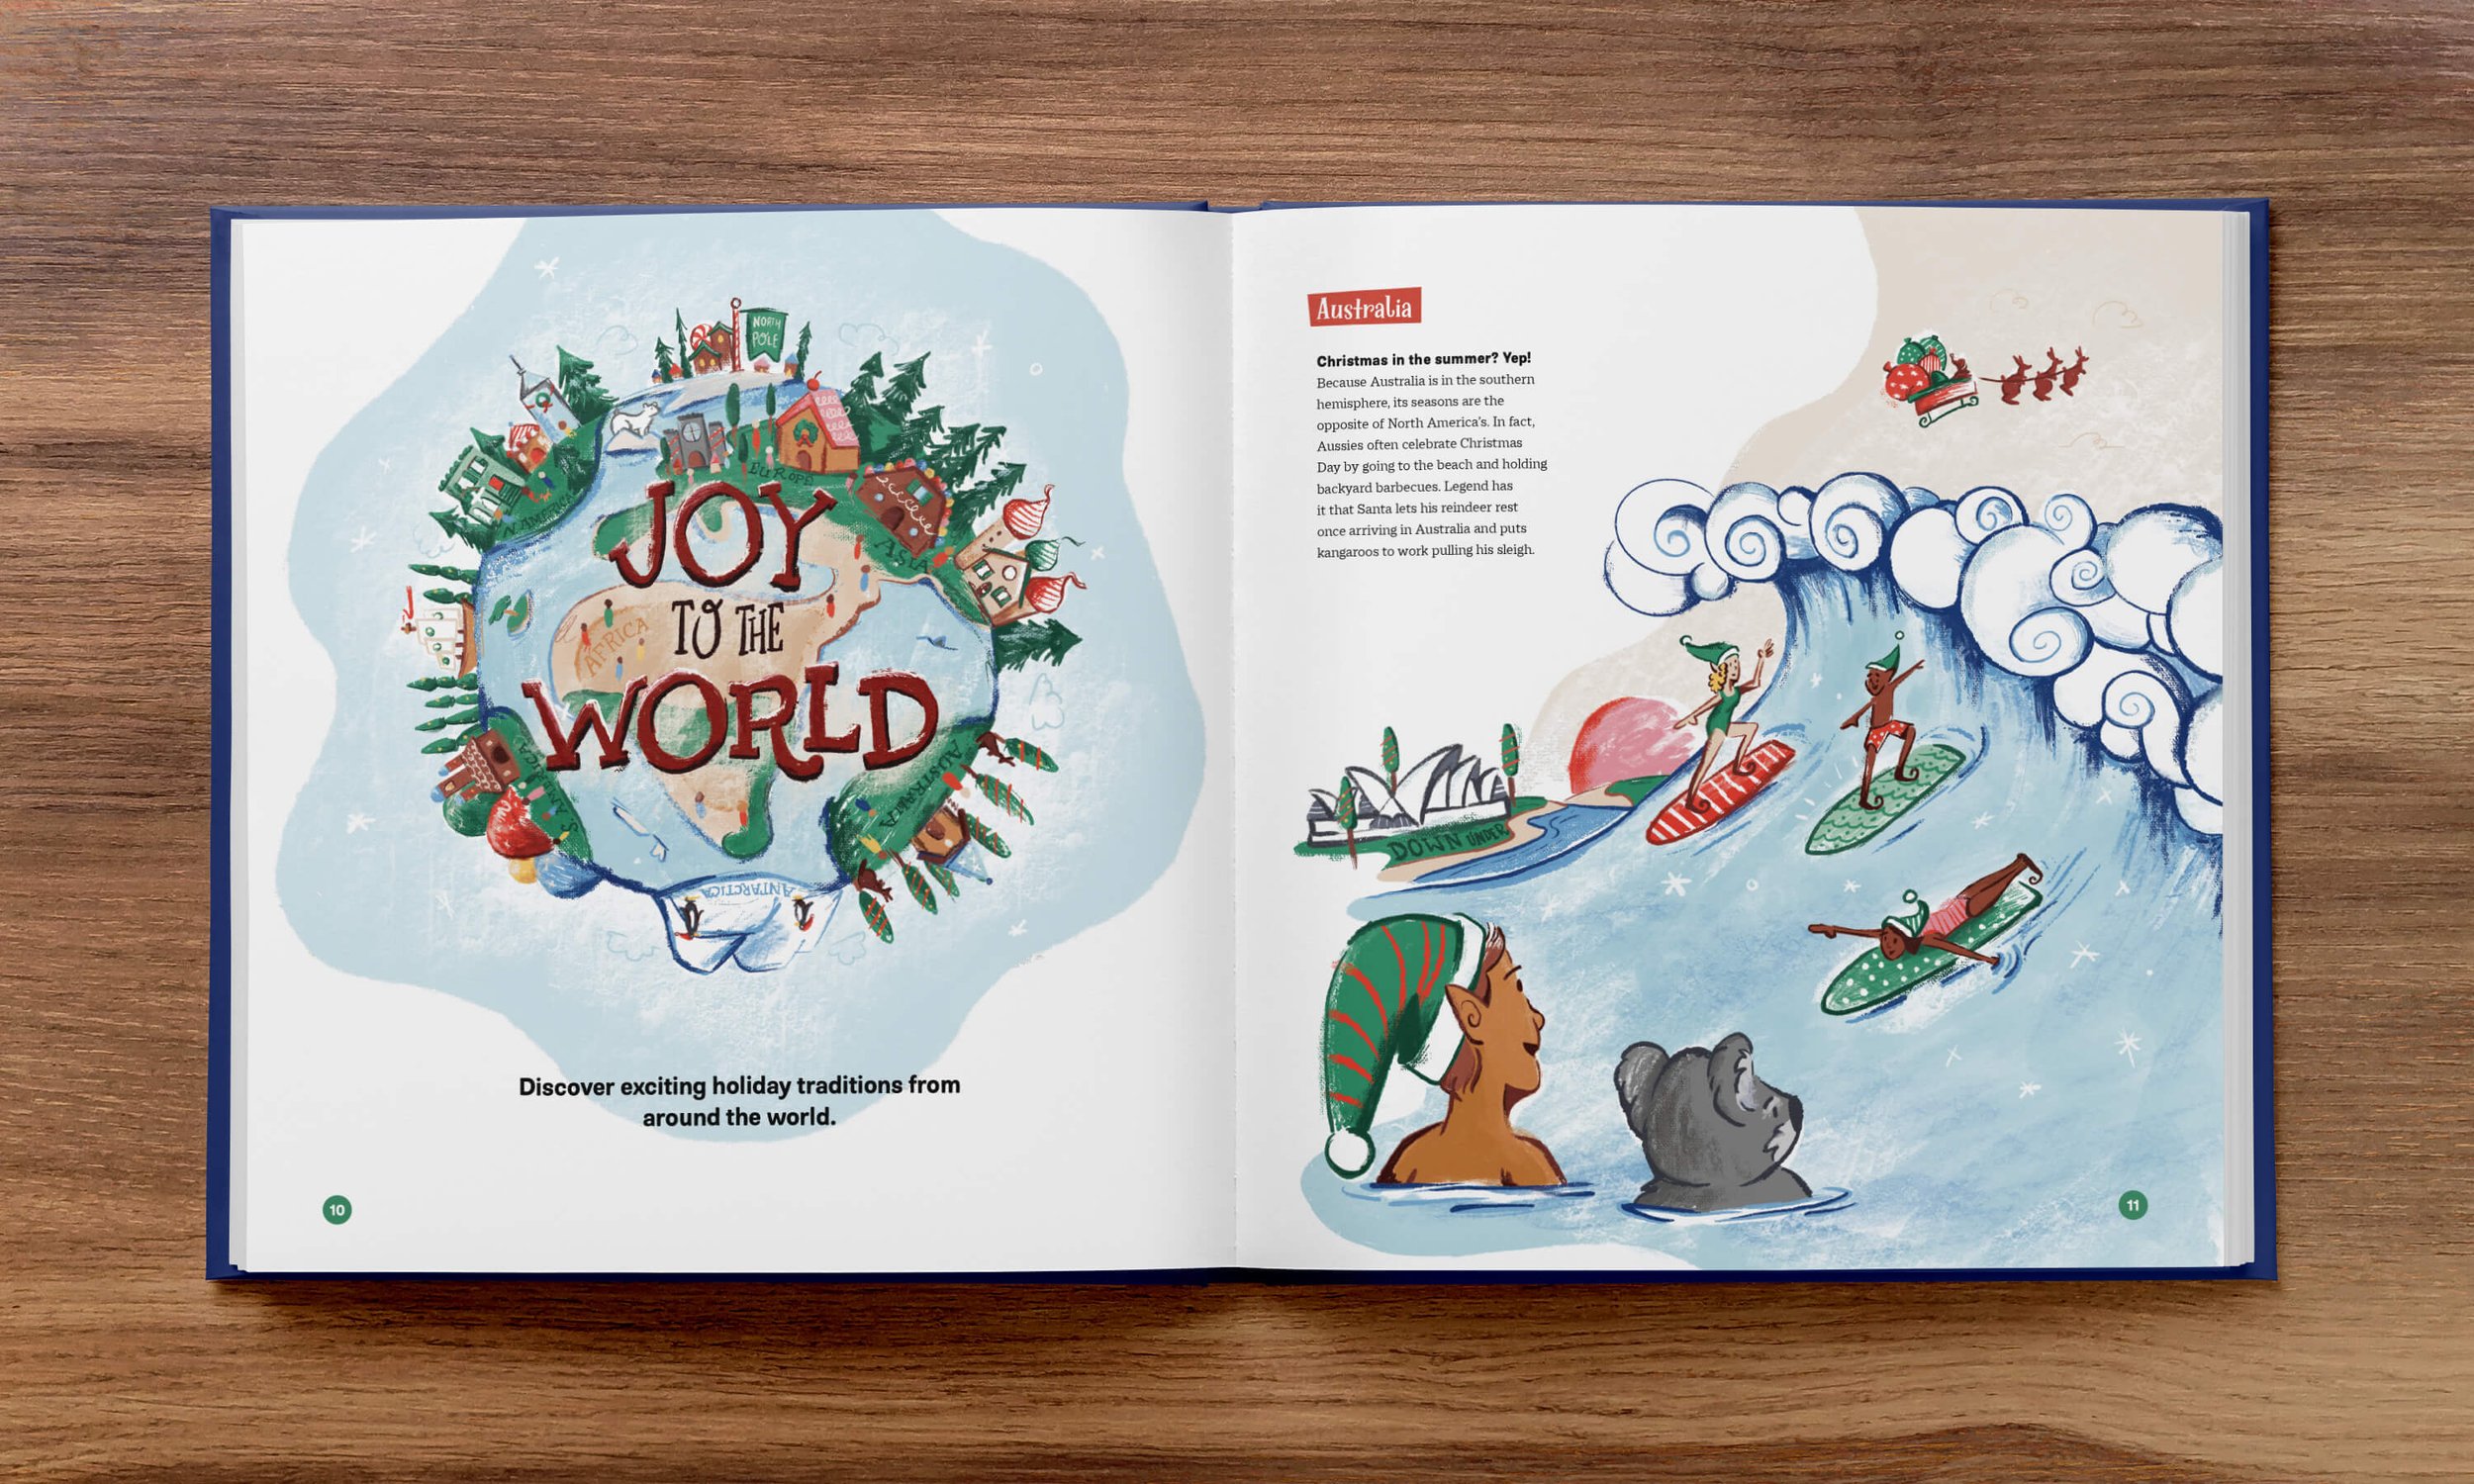  An open book on a wooden table displaying a colorful illustration with the text "joy to the world" and scenes depicting holiday traditions from around the world. On the right, elves surf in Australia on Christmas. 